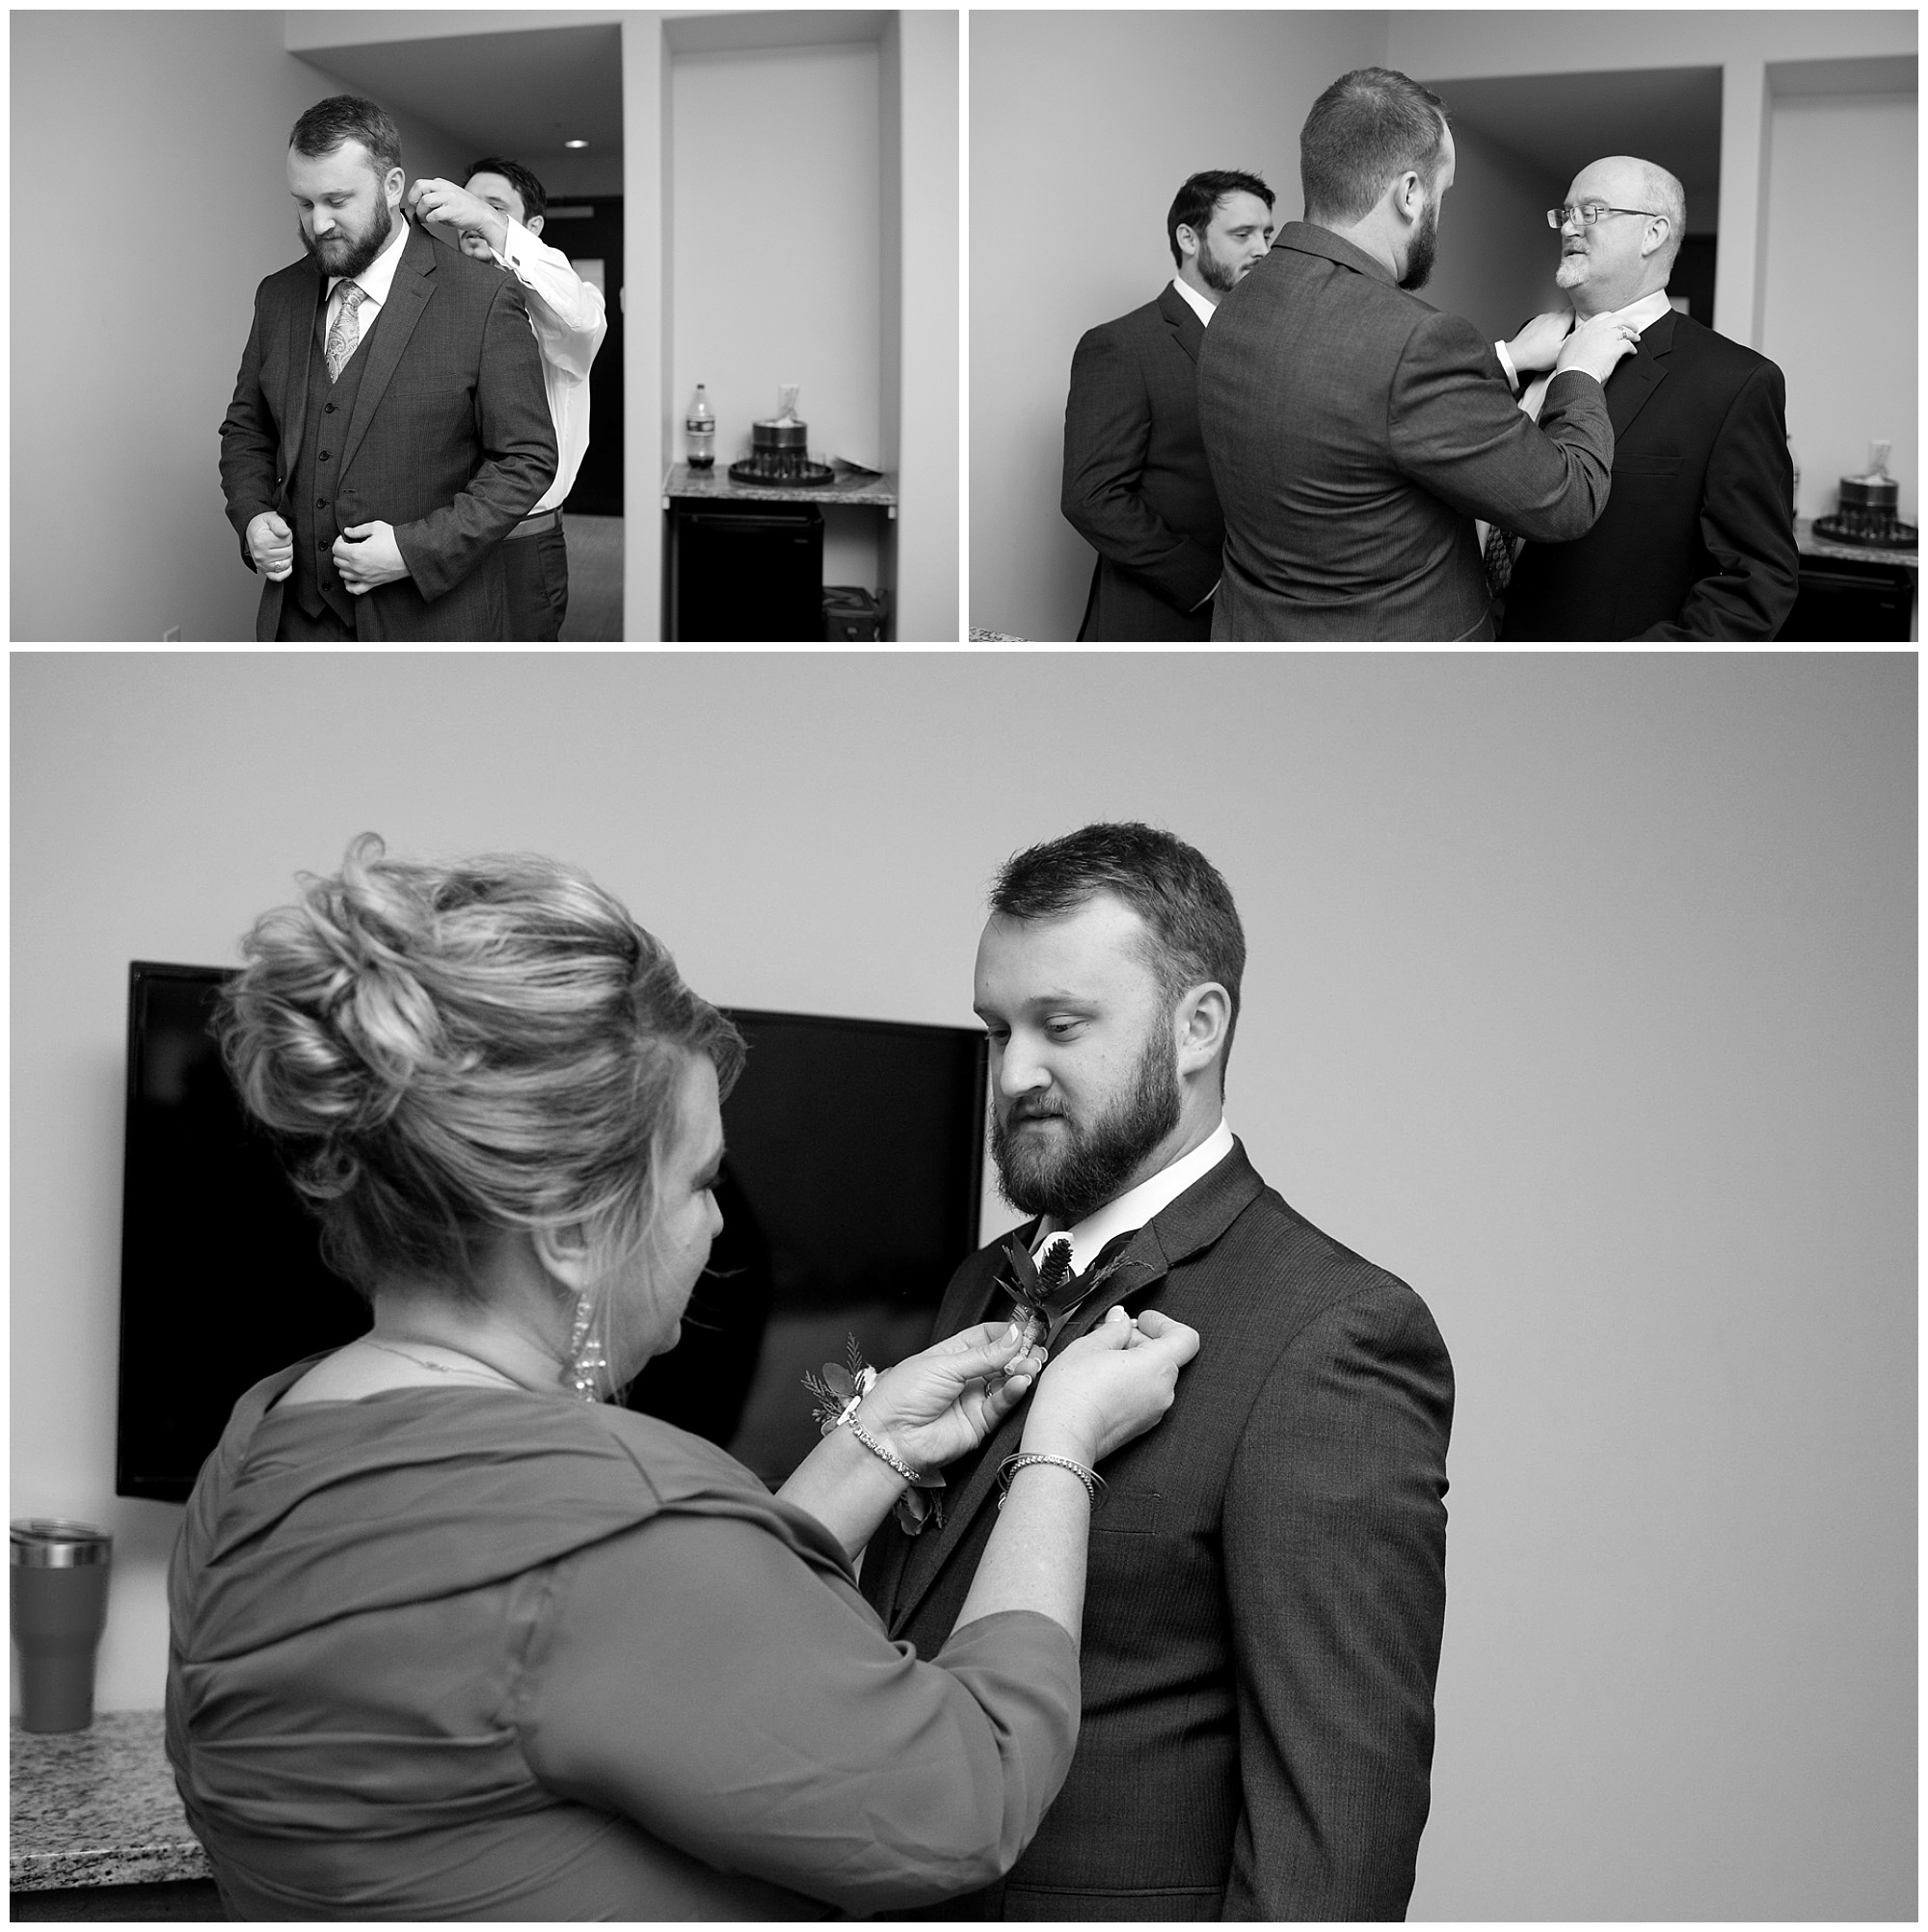 Three phots of the groom with his parents and best man.